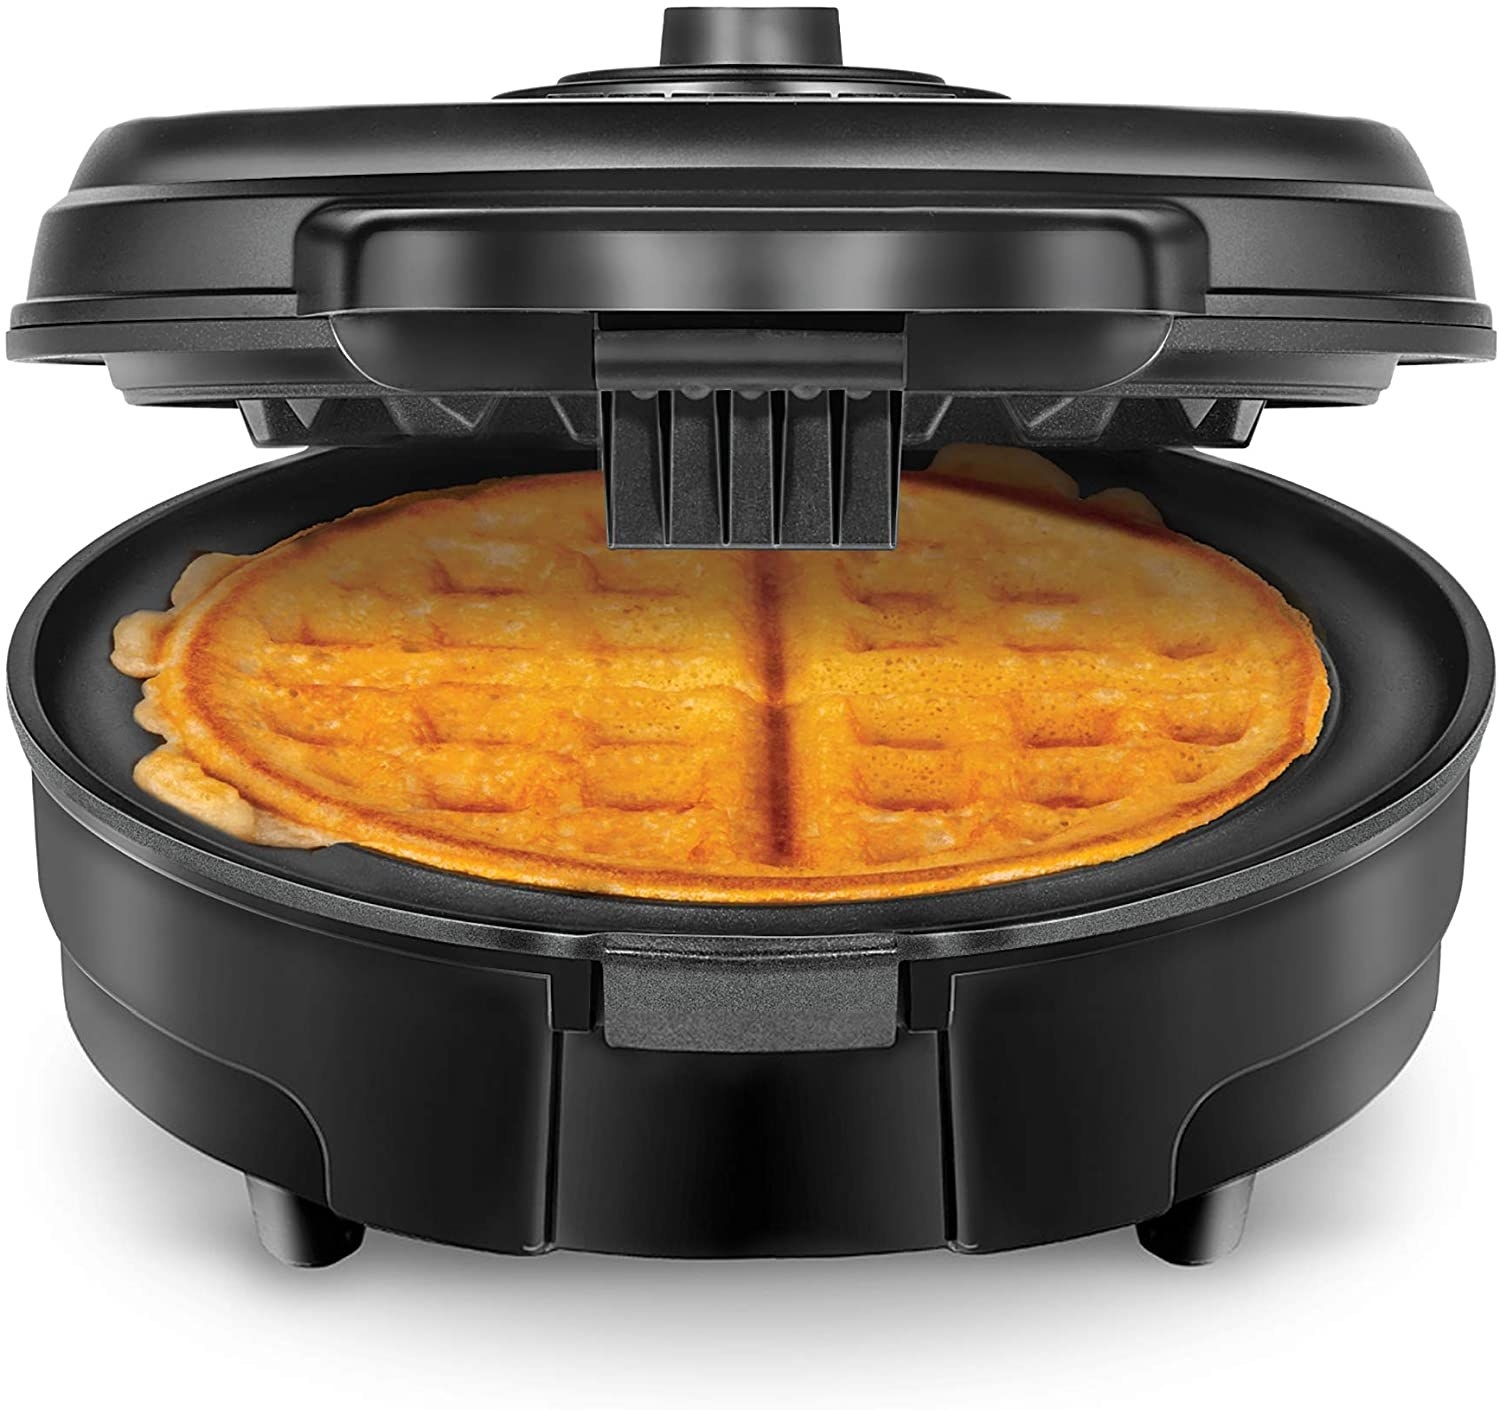 Waffle maker open to reveal cooked waffle inside